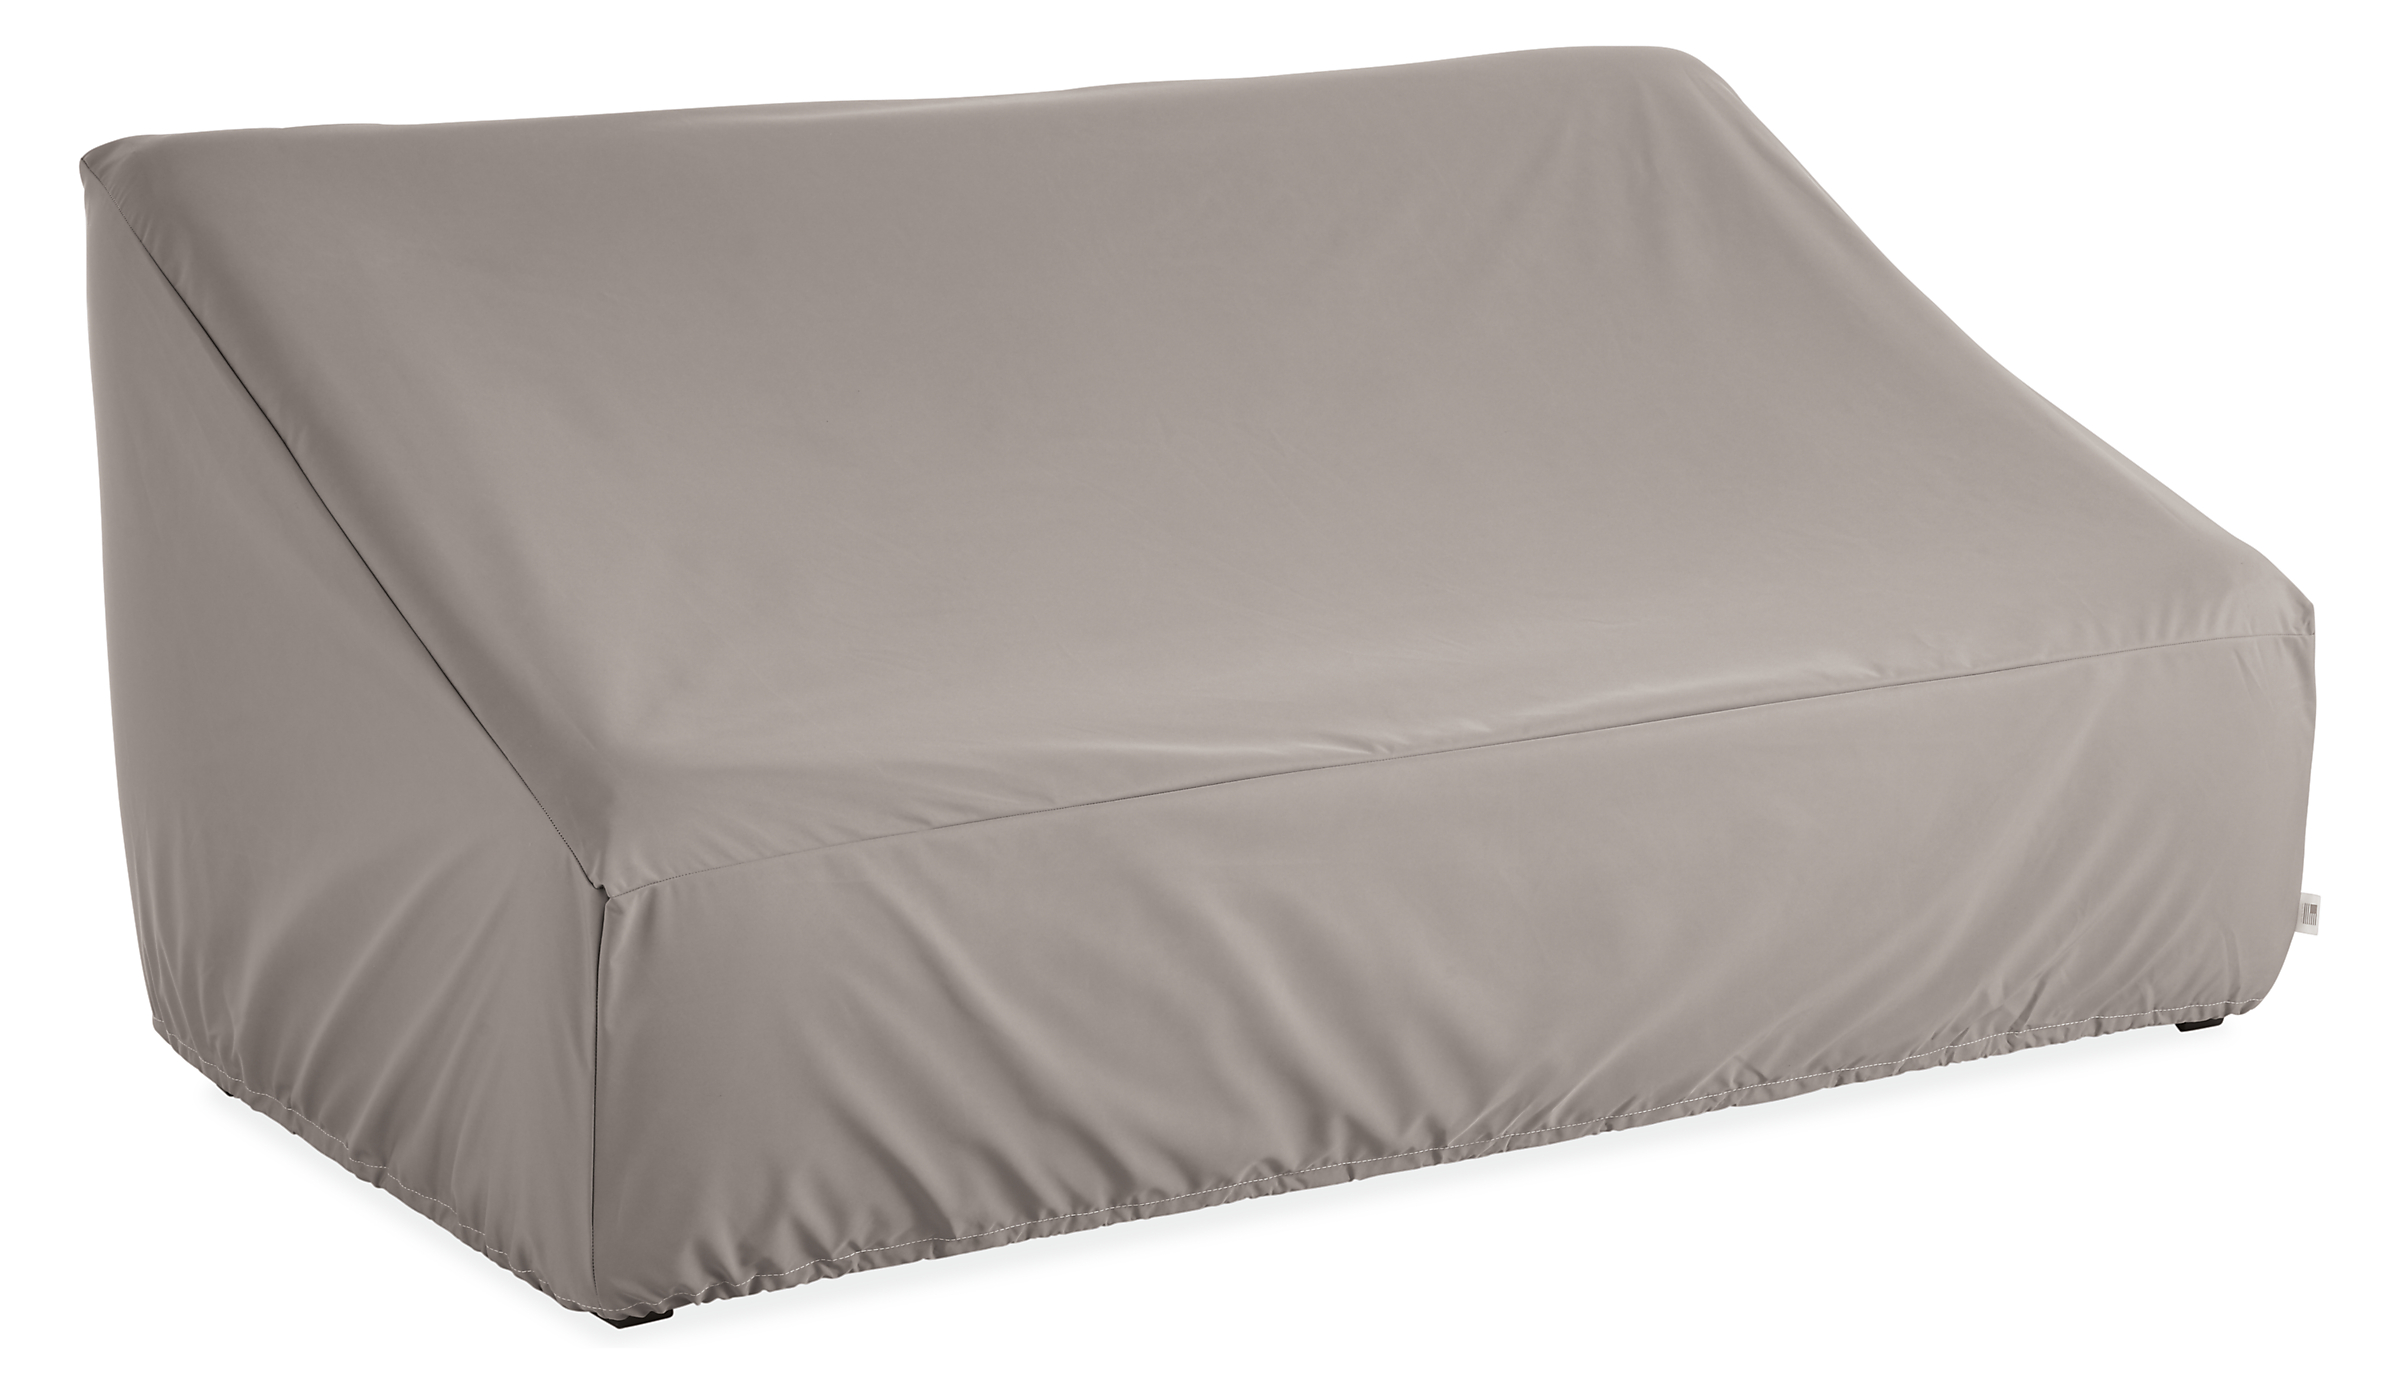 Outdoor Cover for Right-Arm Sofa 81w 39d 26h with Drawstring